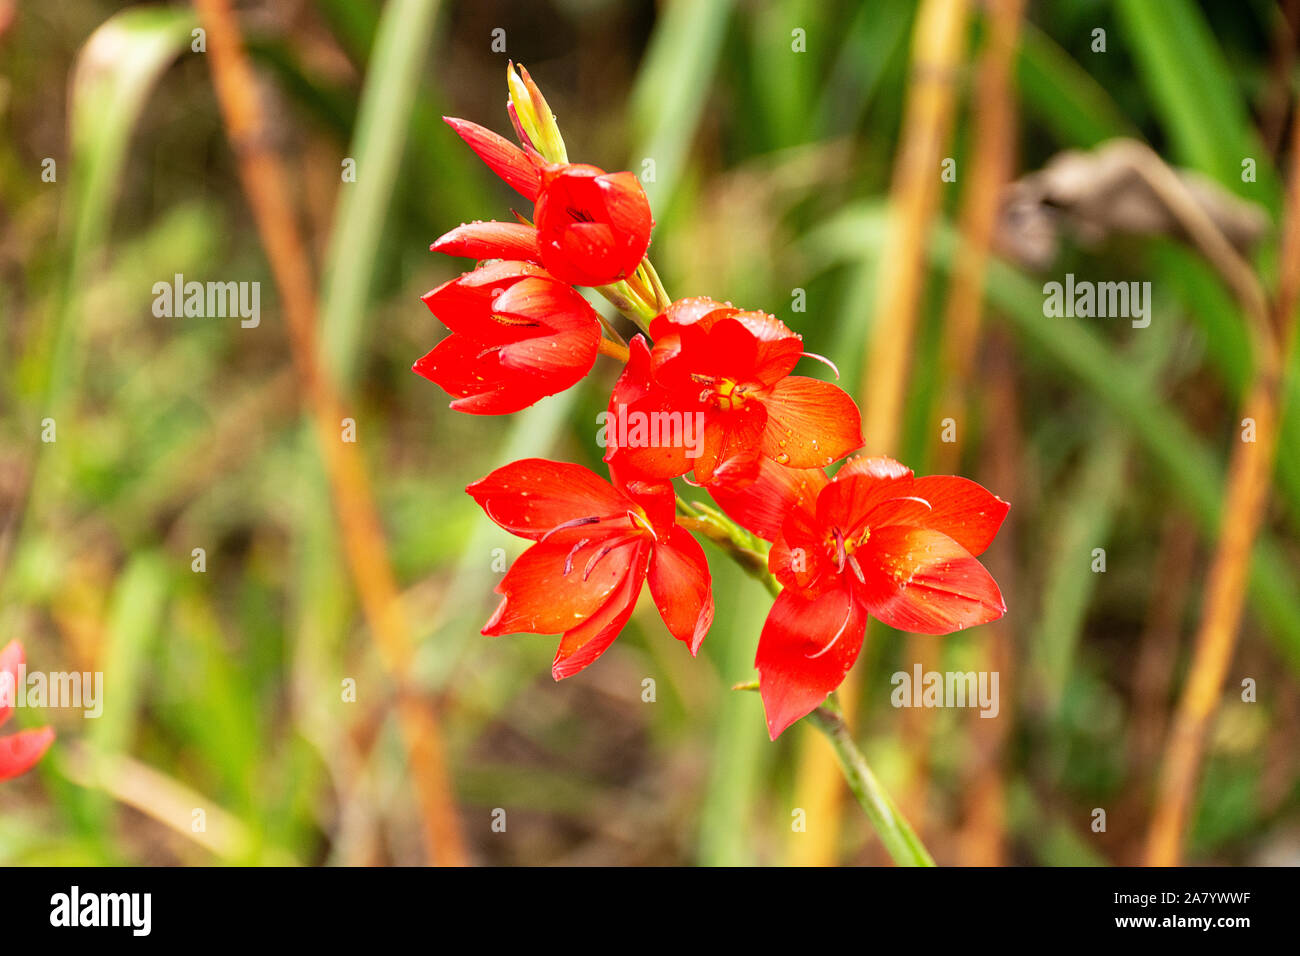 South african gladiolus, 'gladiolus carmineus'. Branch of red flowers with drops of water. Stock Photo